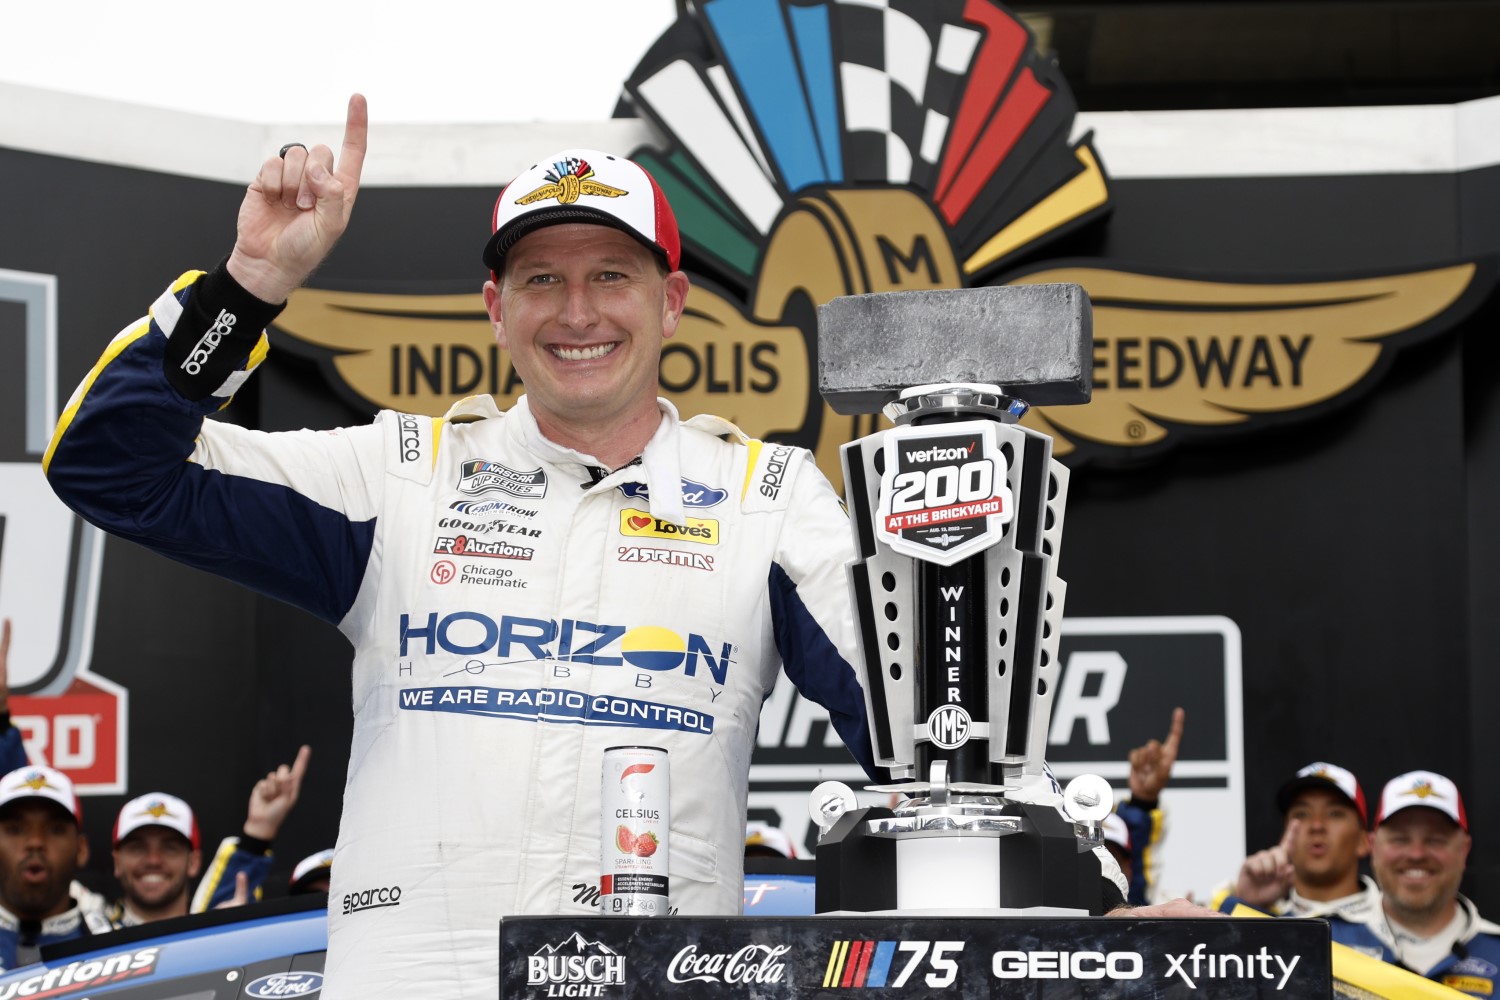 Michael McDowell, driver of the #34 Horizon Hobby Ford, celebrates in victory lane after winning the NASCAR Cup Series Verizon 200 at the Brickyard at Indianapolis Motor Speedway on August 13, 2023 in Indianapolis, Indiana. (Photo by Sean Gardner/Getty Images)